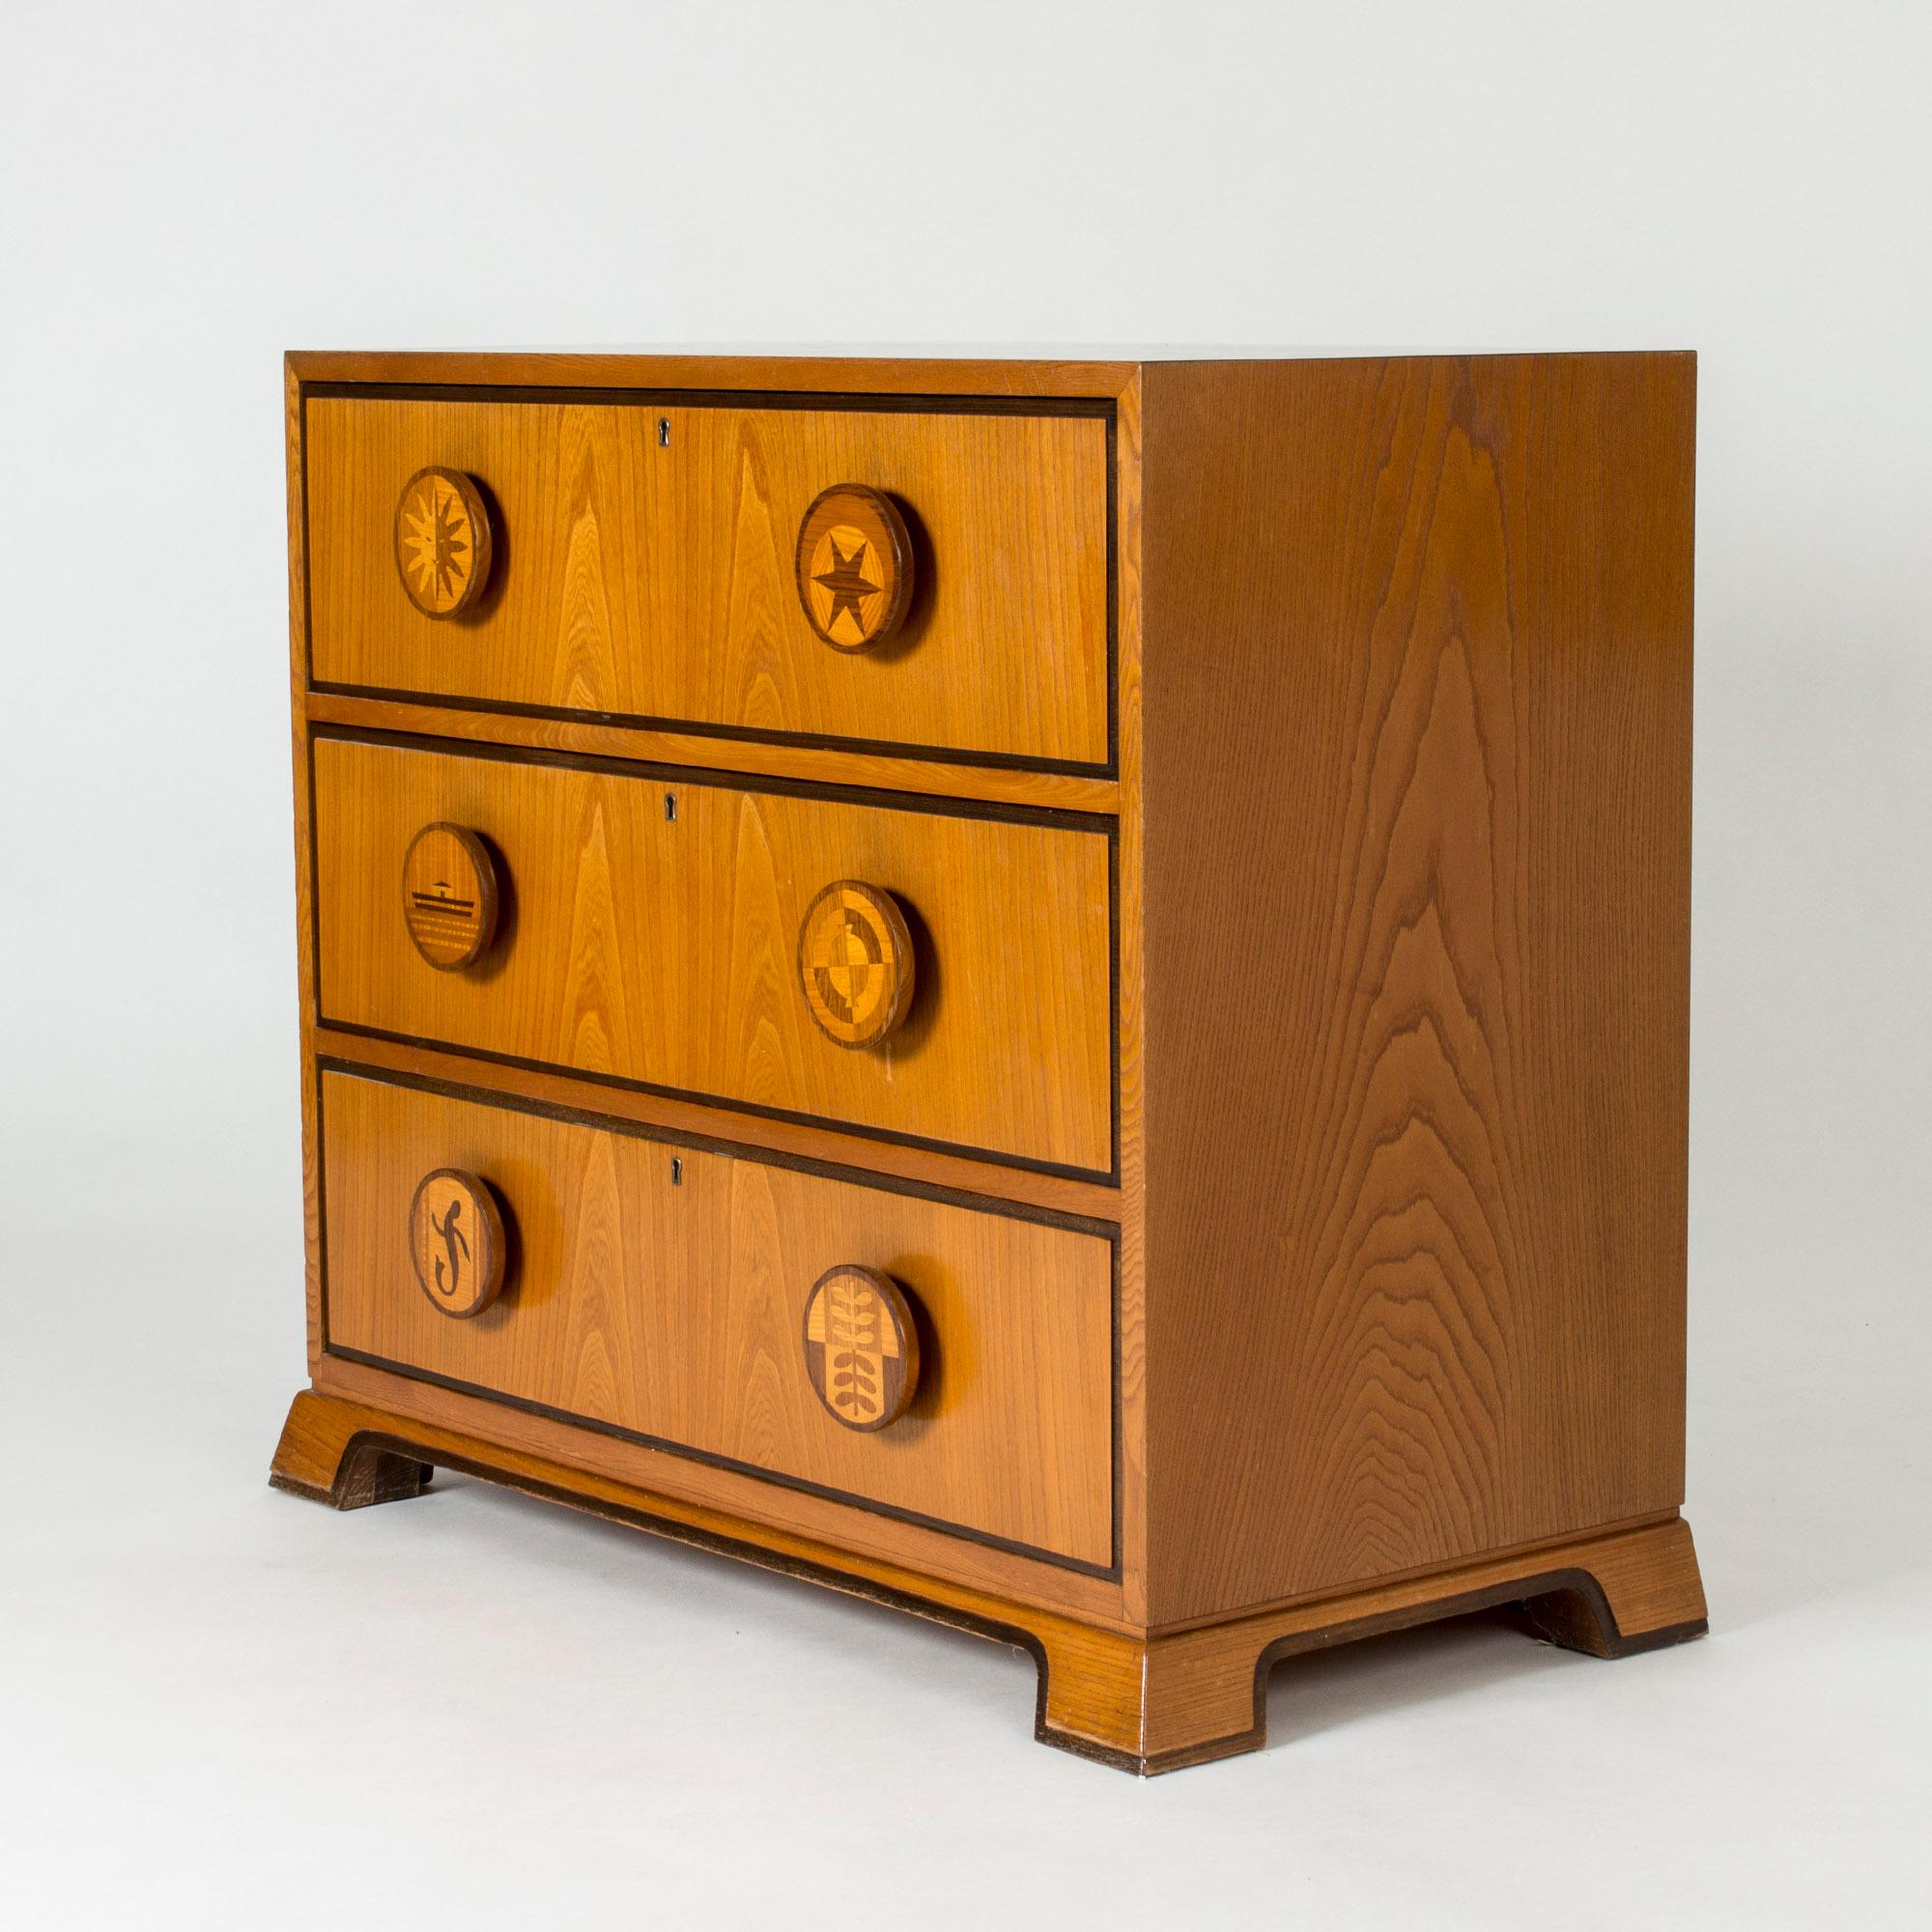 Chest of drawers by Otto Schulz for Boet. Amazing Swedish Modern chest of drawers, made from mahogany. Oversized round drawer handles with inlayed decor of different images. They show a sun, a star, a boat on the water, a compass, a lizard and